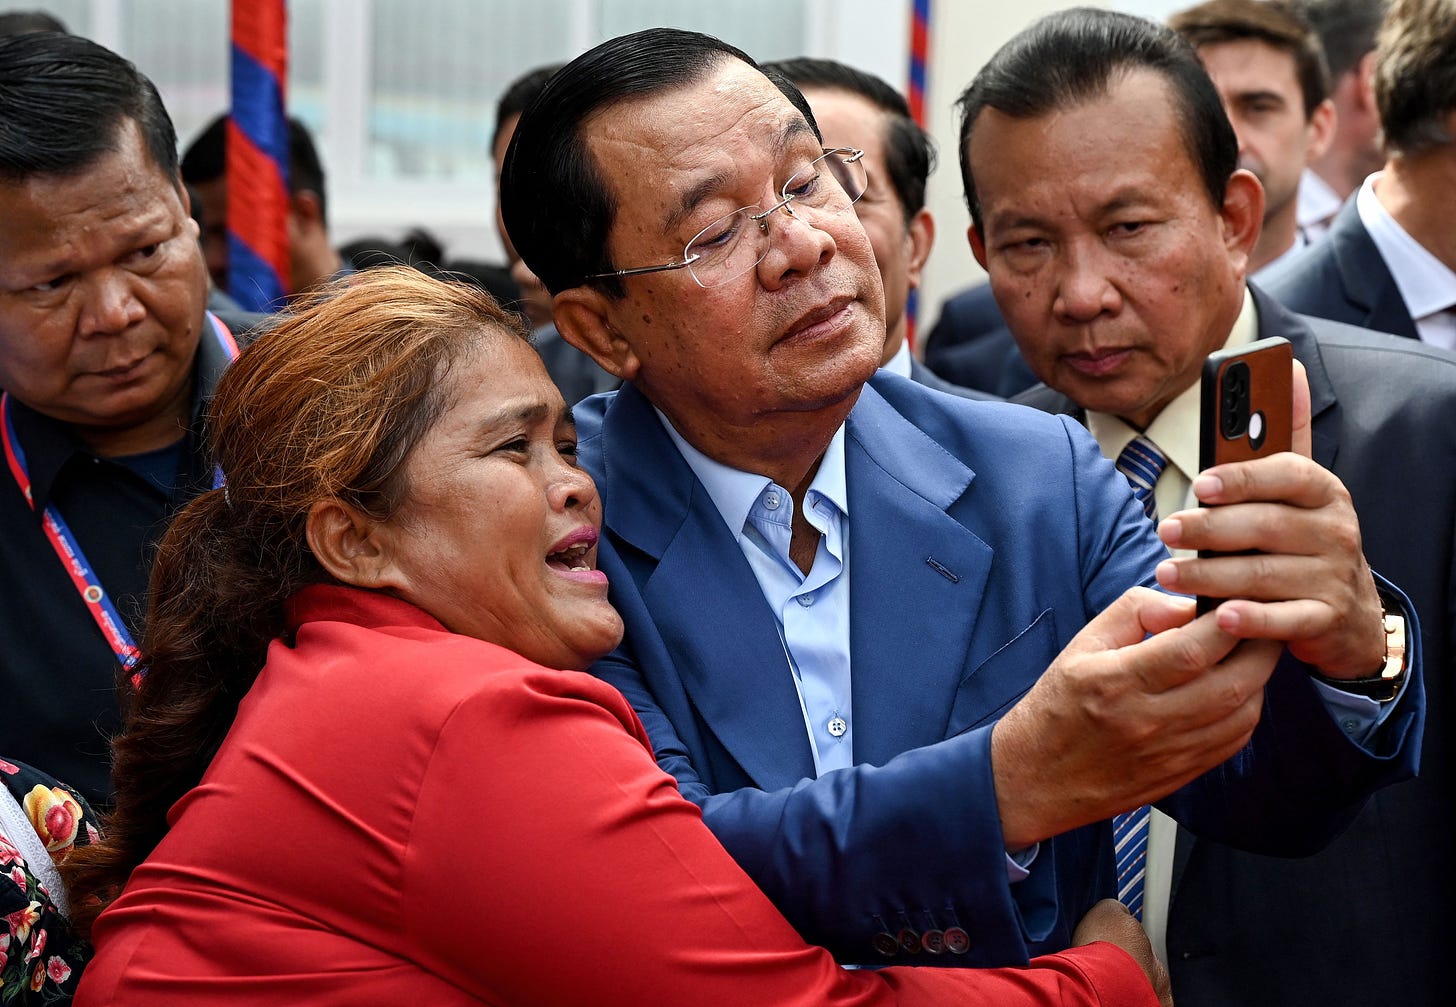 Cambodian Prime Minister Hun Sen takes a selfie with a supporter in June. (Tang Chhin Sothy / Getty Images)